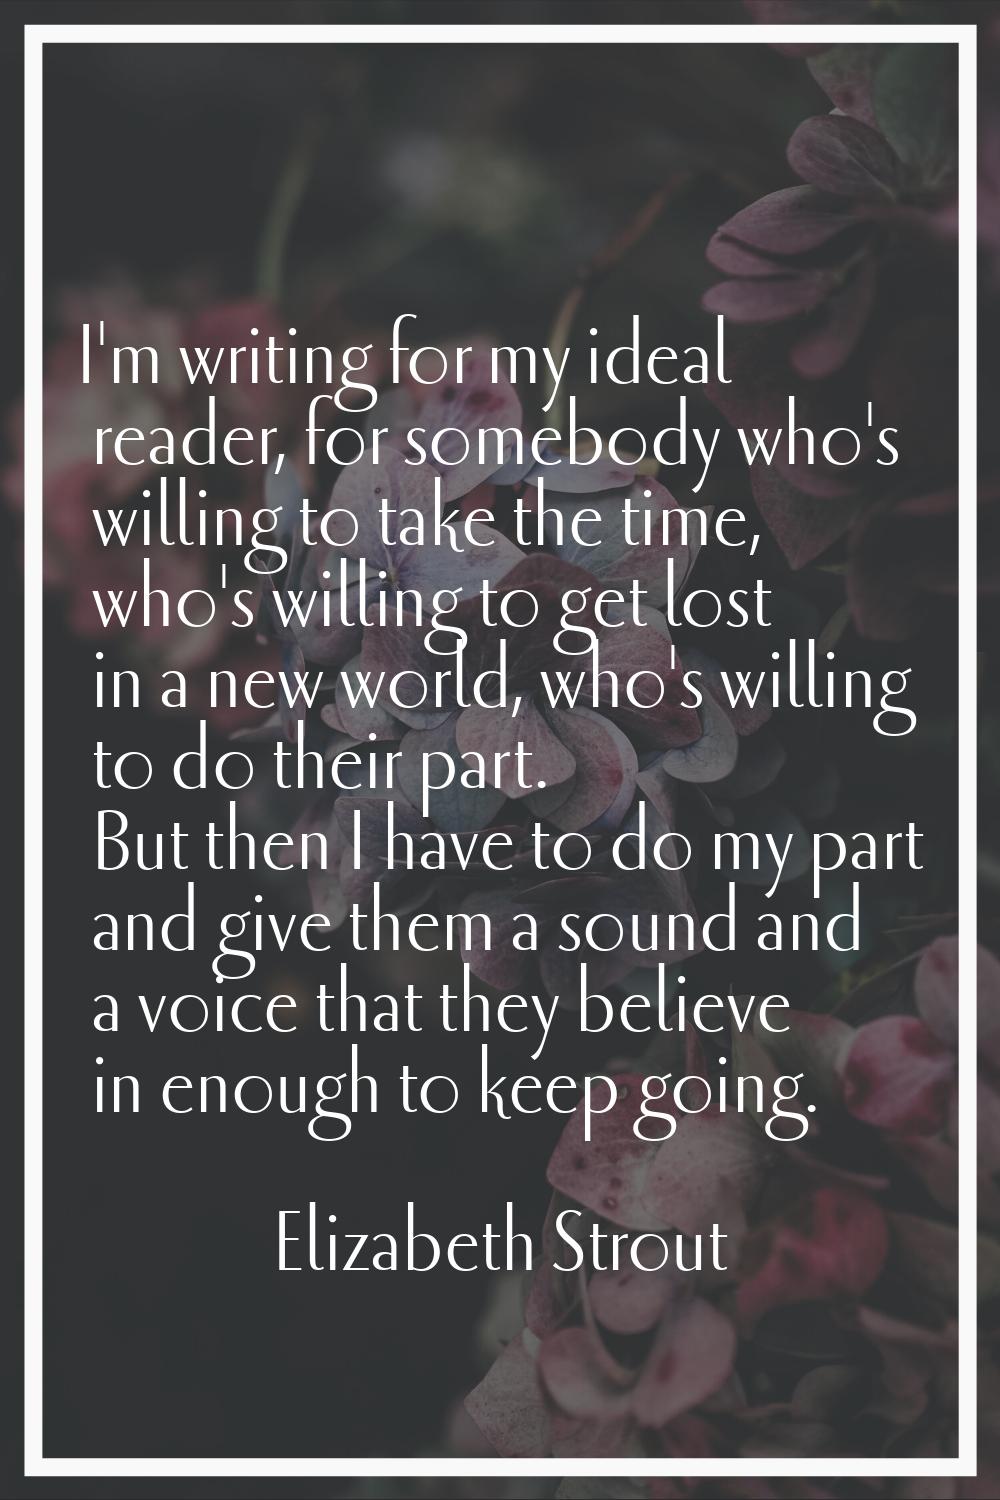 I'm writing for my ideal reader, for somebody who's willing to take the time, who's willing to get 